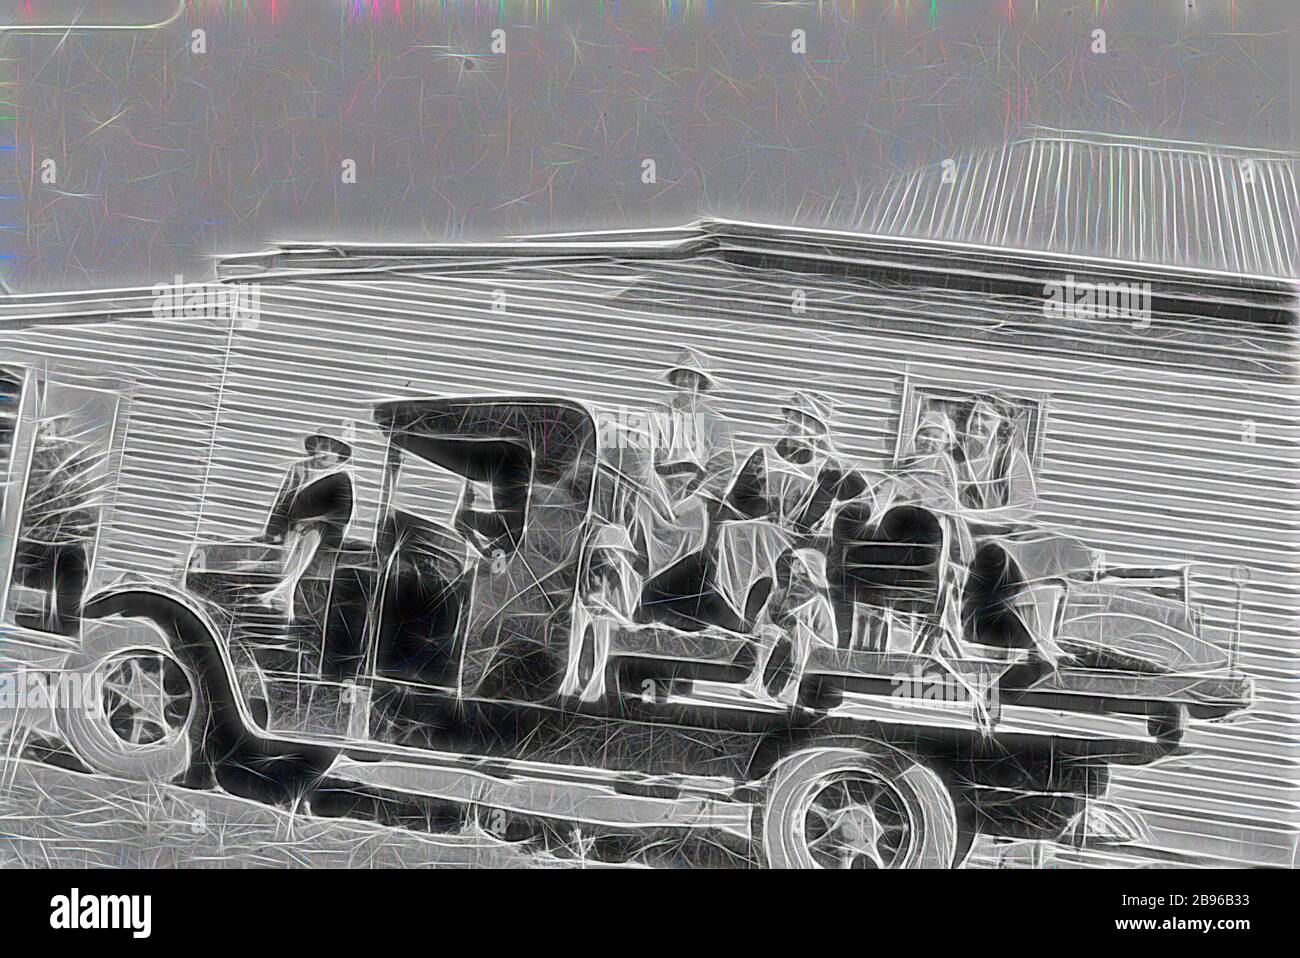 Negative - Women & Children Sitting on a Brockway Truck, Karoonda, South Australia, circa 1925, Women and children sitting on a Brockway truck., Reimagined by Gibon, design of warm cheerful glowing of brightness and light rays radiance. Classic art reinvented with a modern twist. Photography inspired by futurism, embracing dynamic energy of modern technology, movement, speed and revolutionize culture. Stock Photo